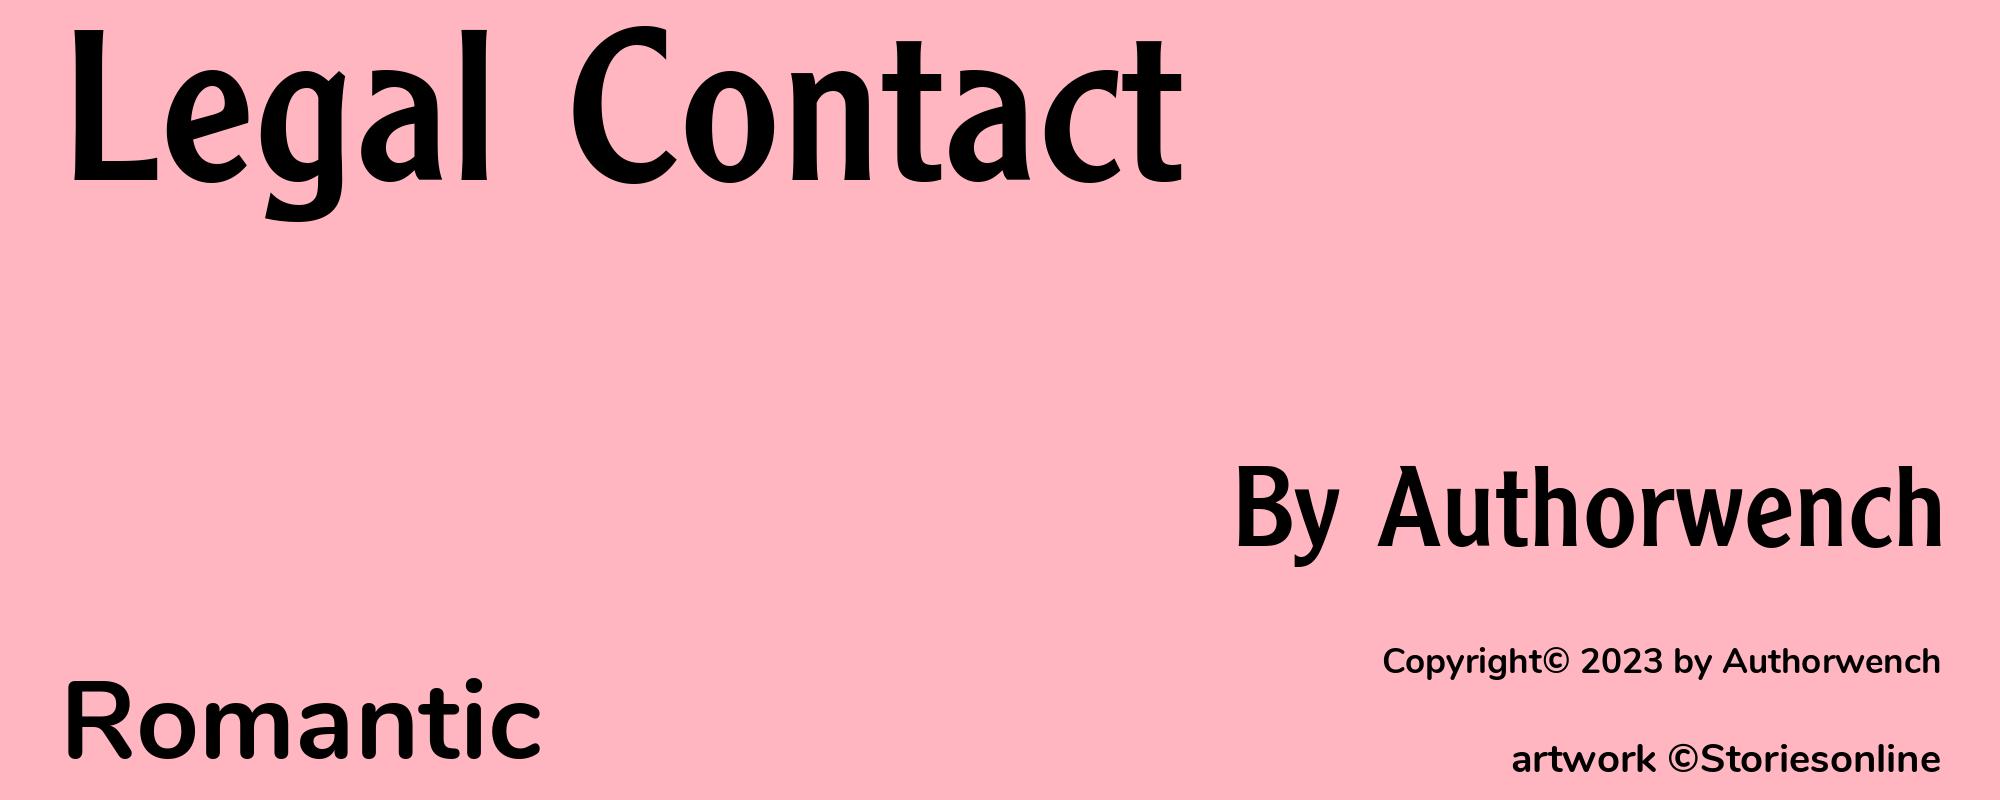 Legal Contact - Cover